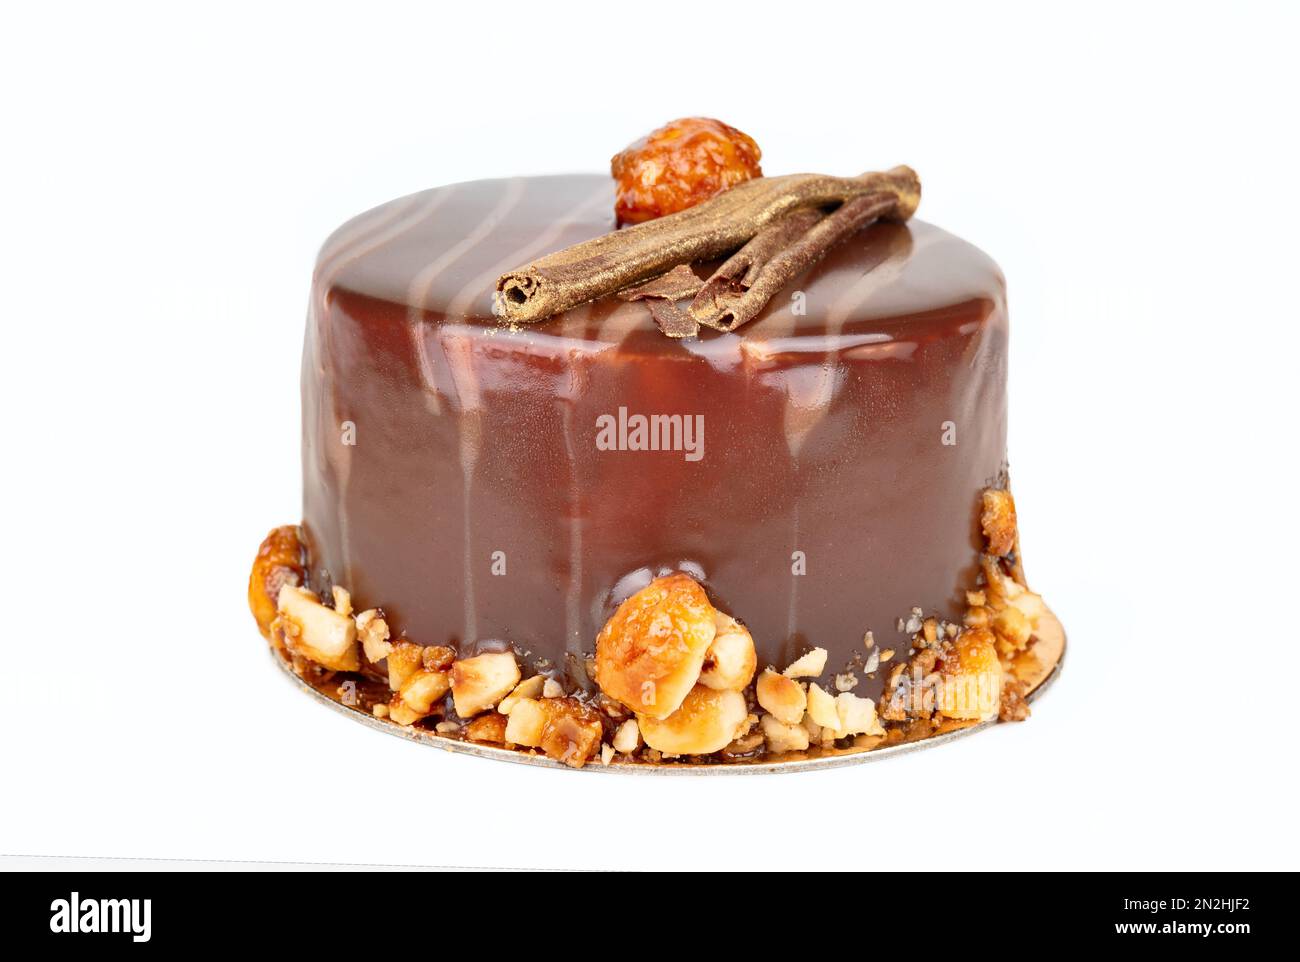 Chocolate cake with salty and sweet caramel inside, doused with icing with nuts. Very tender and tasty dessert. Stock Photo